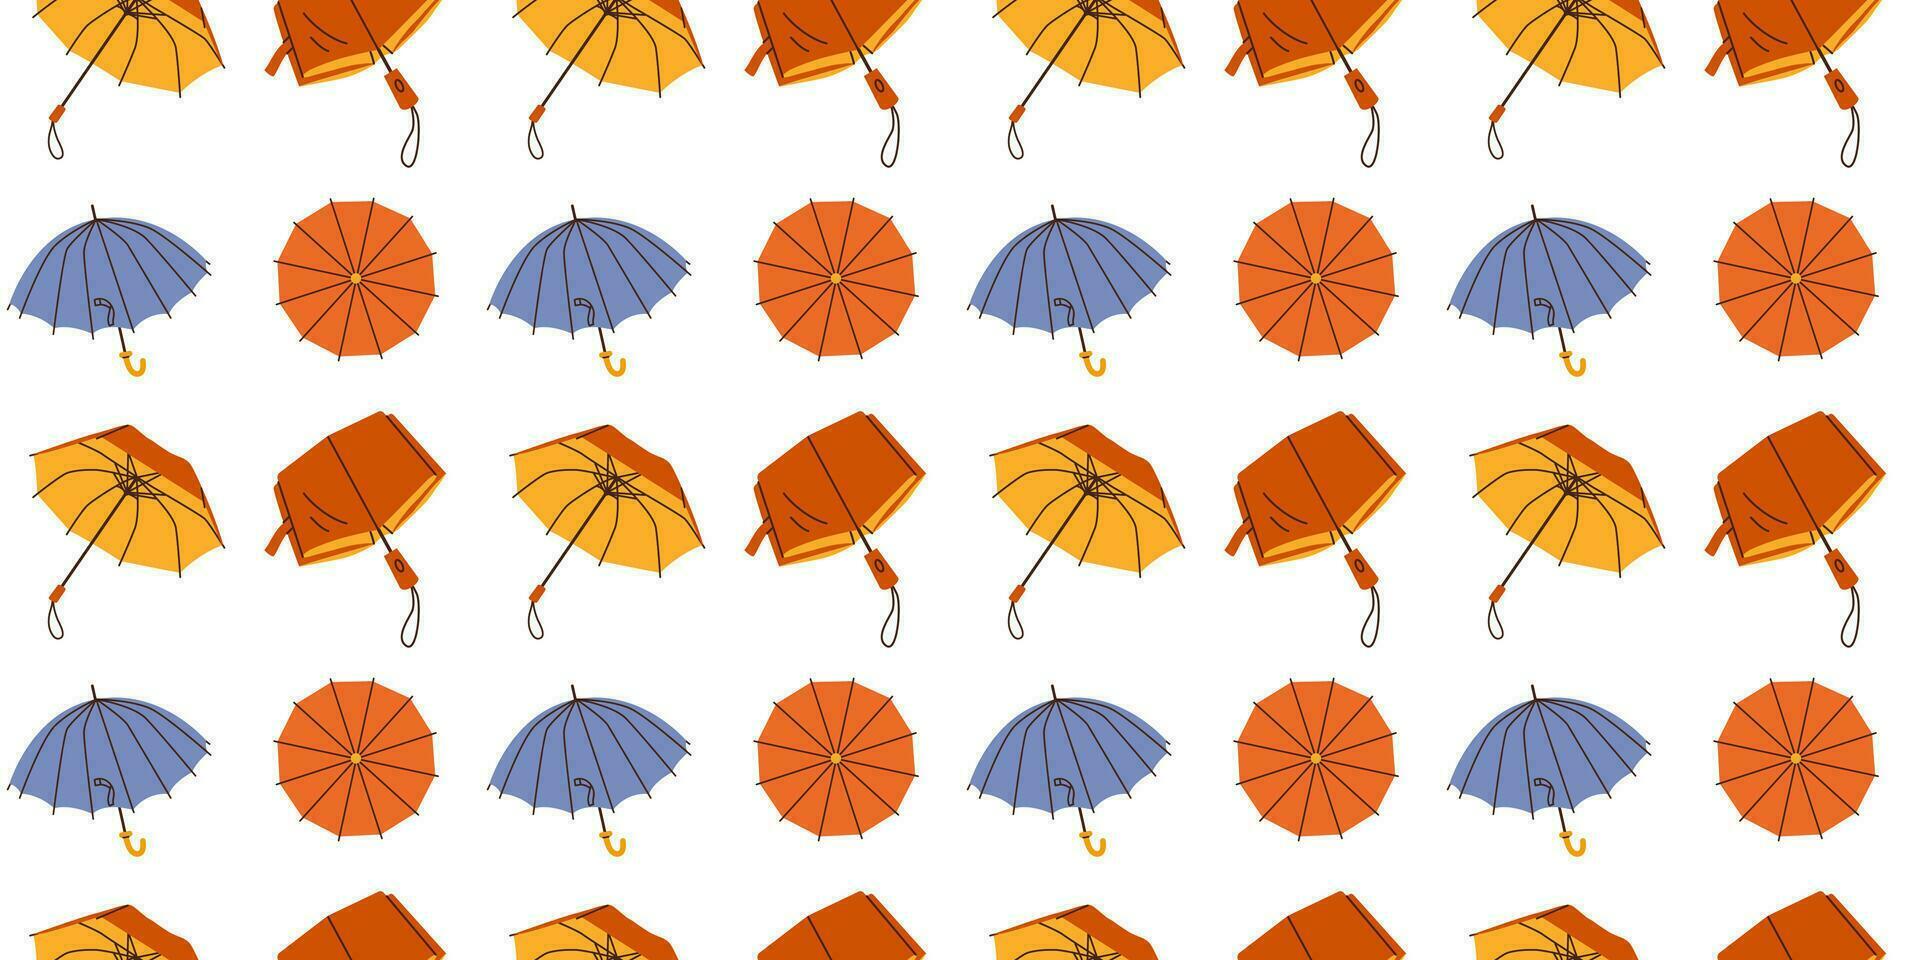 Seamless pattern with hand drawn blue red yellow umbrellas on white background in flat cartoon style. For background, packaging, textile vector